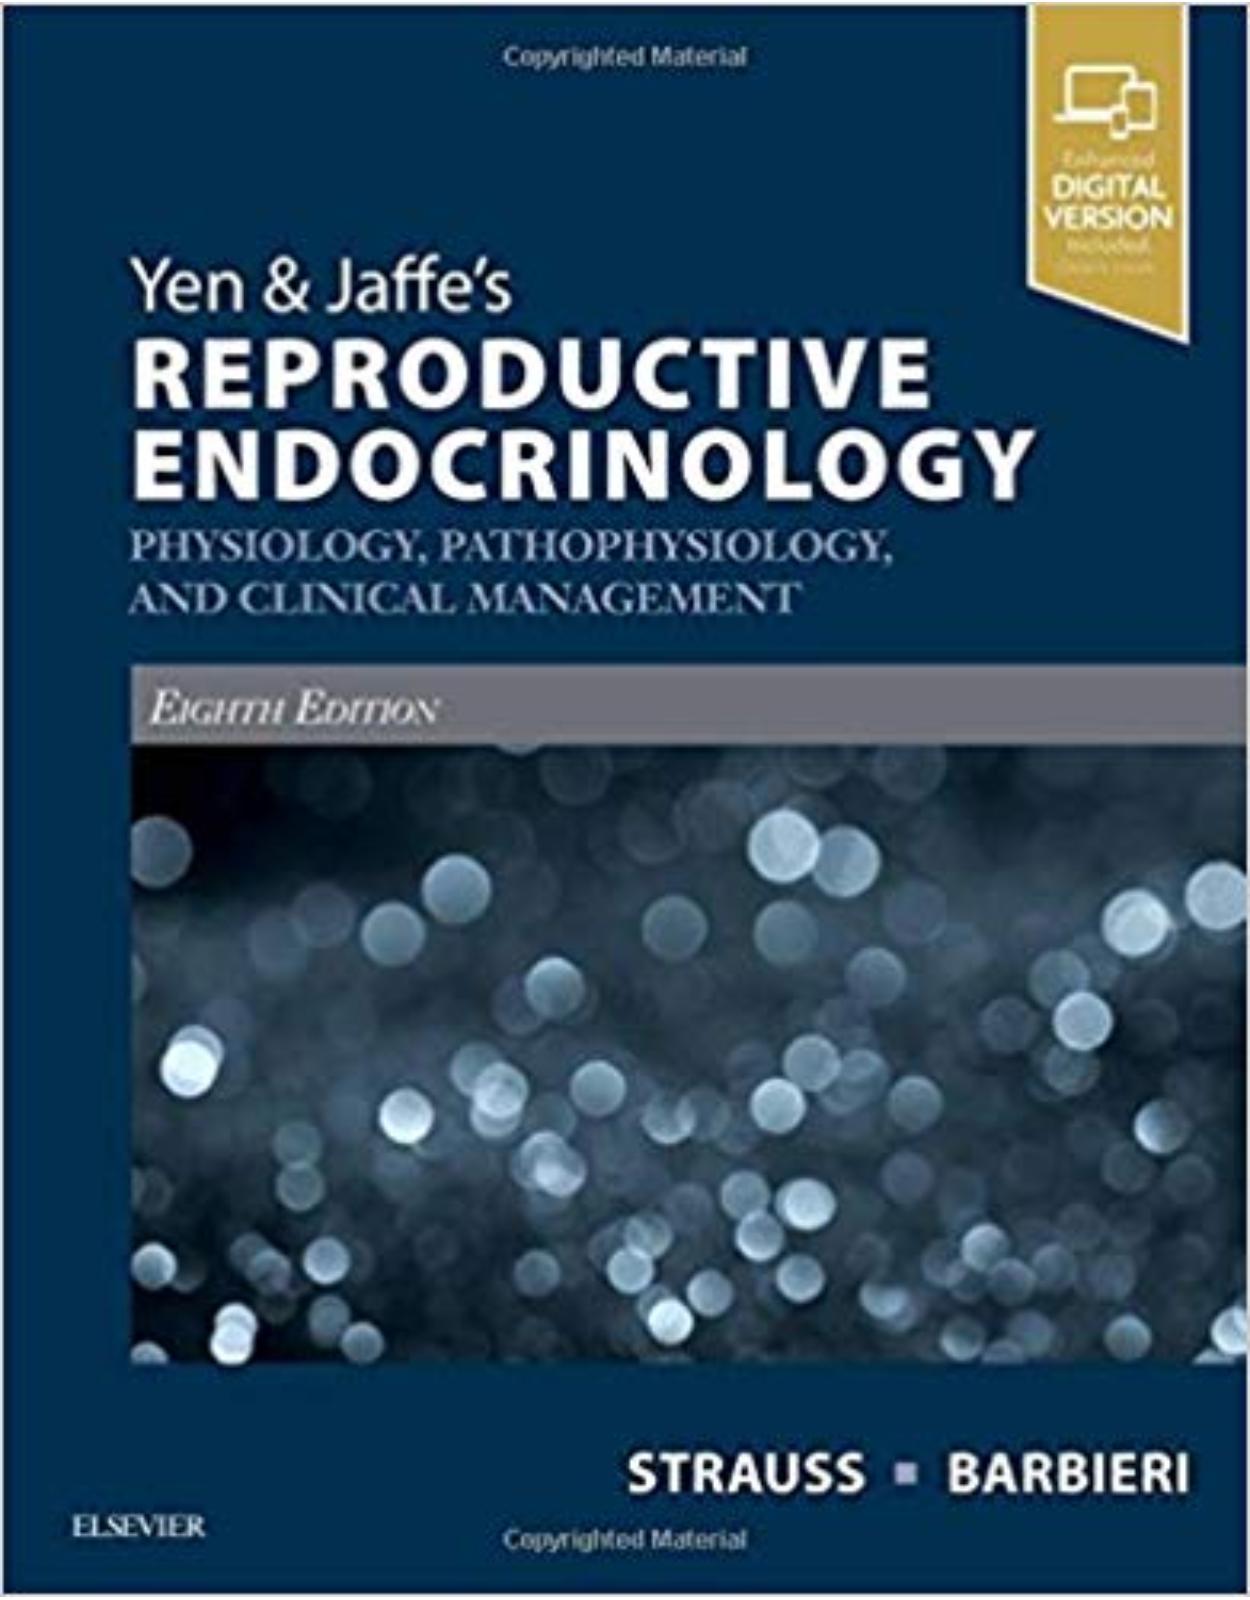 Yen & Jaffe’s Reproductive Endocrinology: Physiology, Pathophysiology, and Clinical Management, 8e